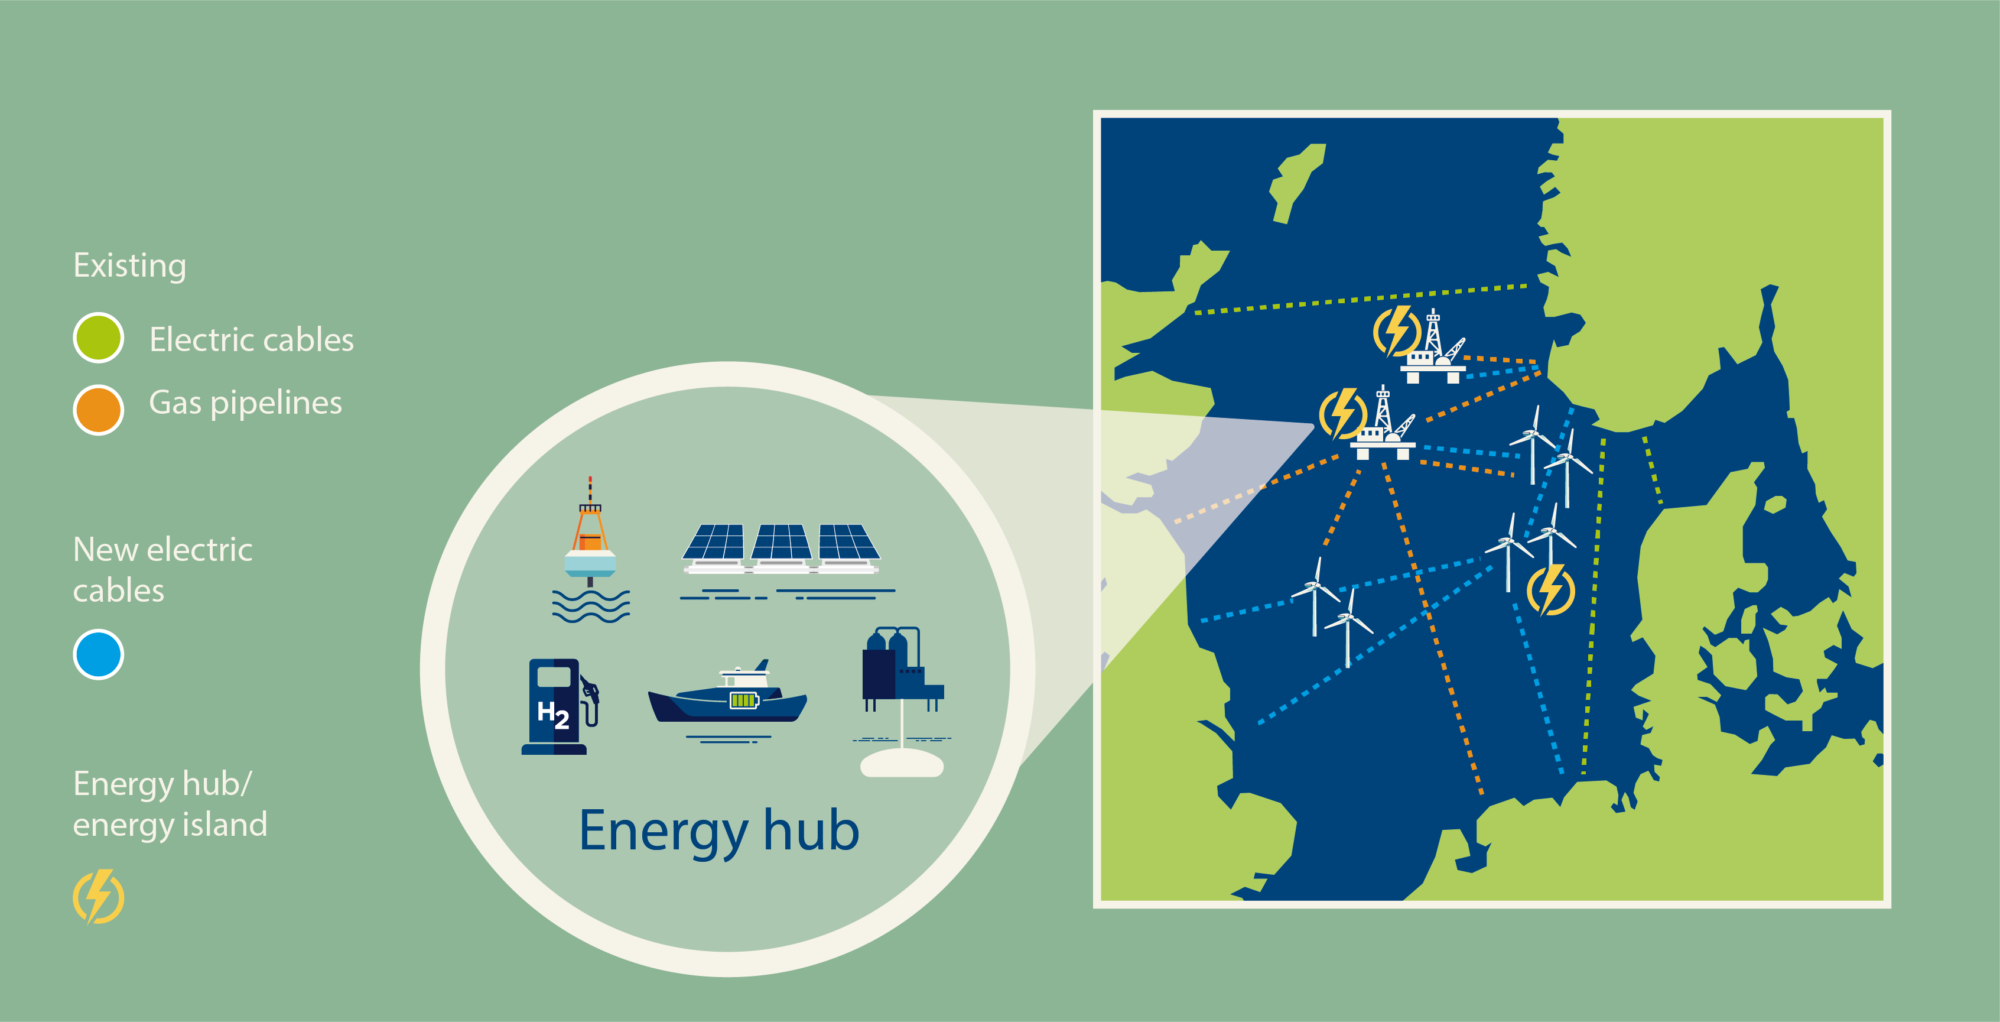 Example of what a future North Sea network can look like, with offshore wind farms, connections between countries and energy hubs that can supply ships with hydrogen and include installations for CO2-storage. The building of this infrastructure will have to happen in stages. It will require strong international cooperation and coordination between the countries and companies involved in the project.